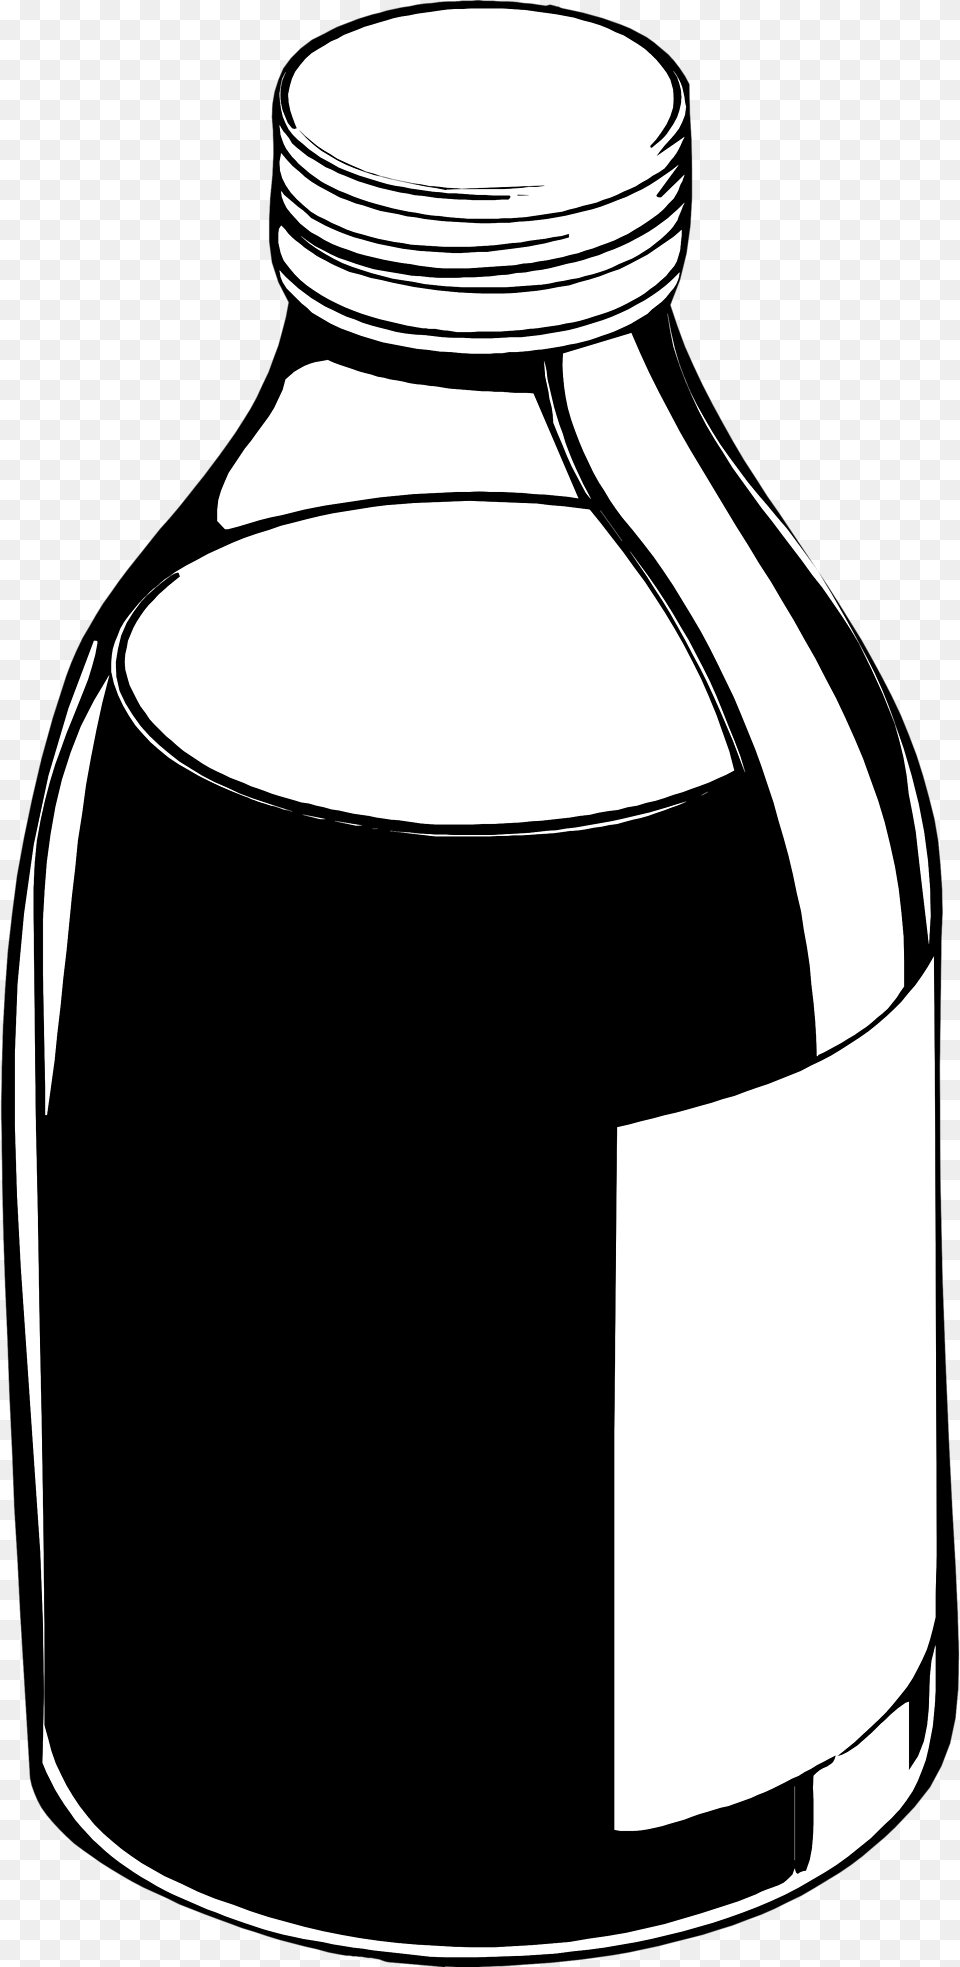 Transparent Stock Collection Of Bottle High Cough Syrup Black And White, Ink Bottle, Shaker Png Image